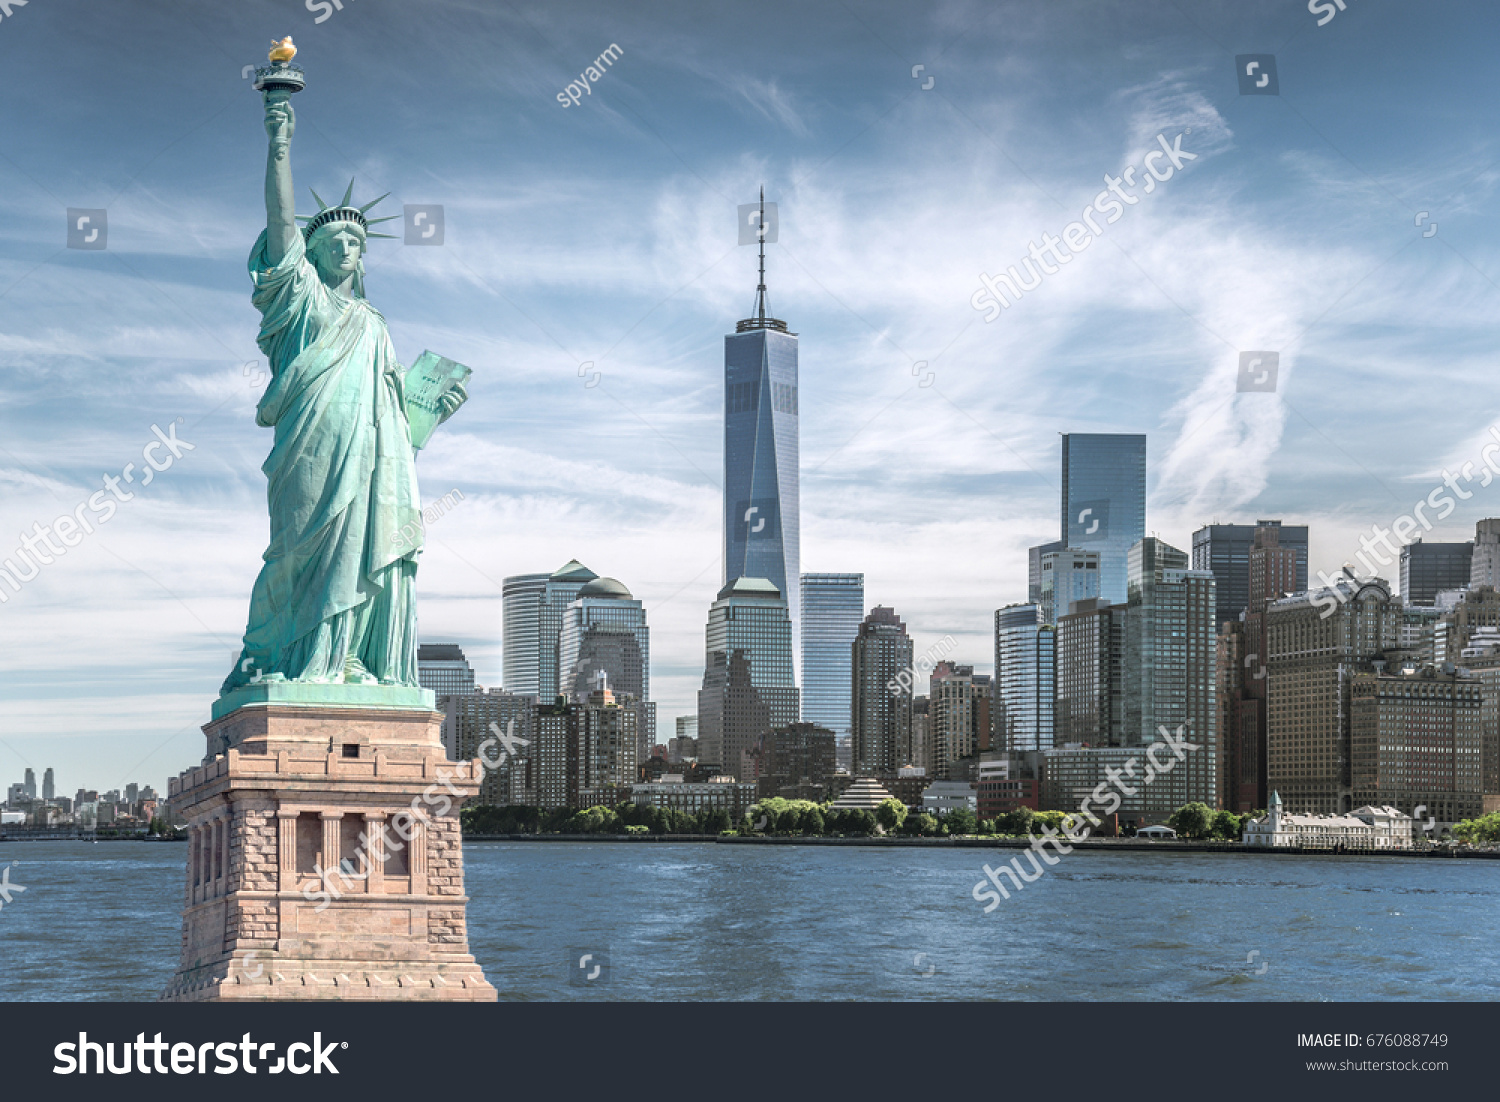 The statue of Liberty with World Trade Center background, Landmarks of New York City #676088749